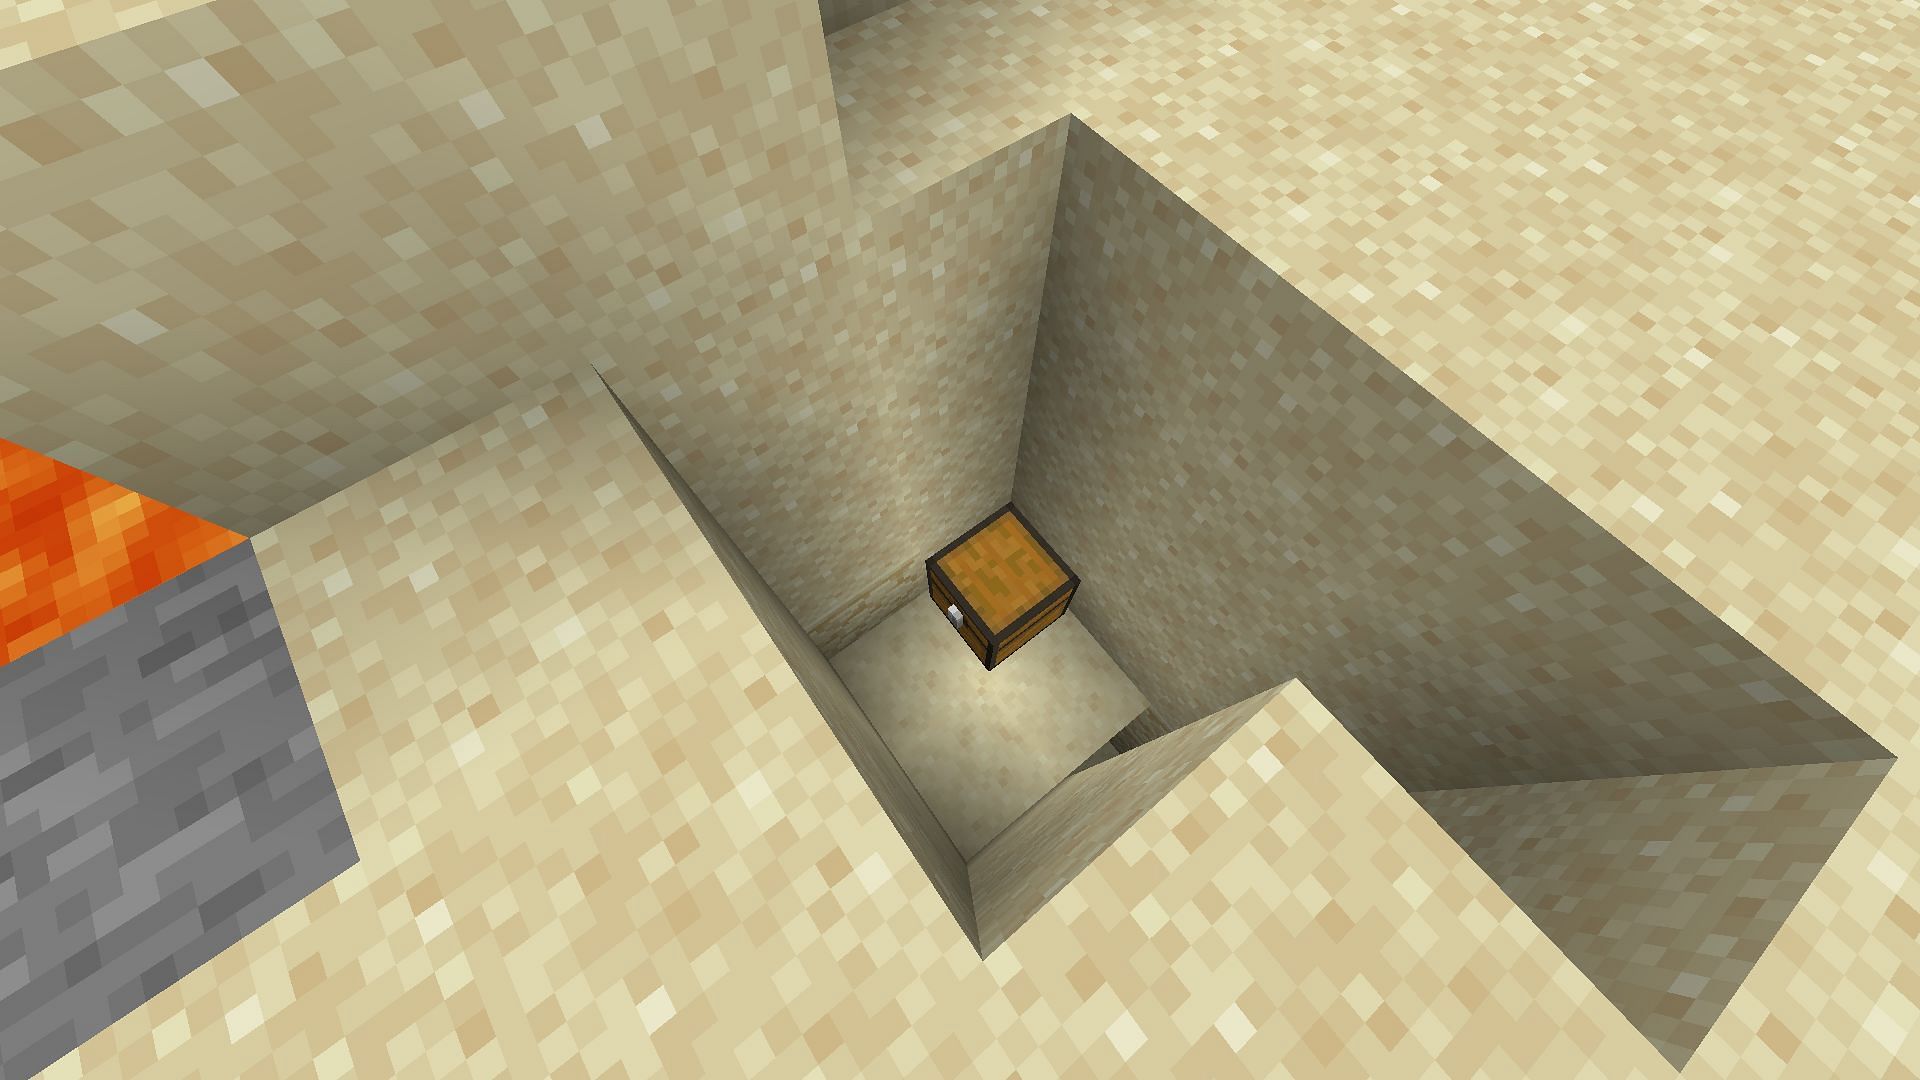 Buried treasure chests give players loads of valuable items to get a headstart in Minecraft (Image via Mojang)